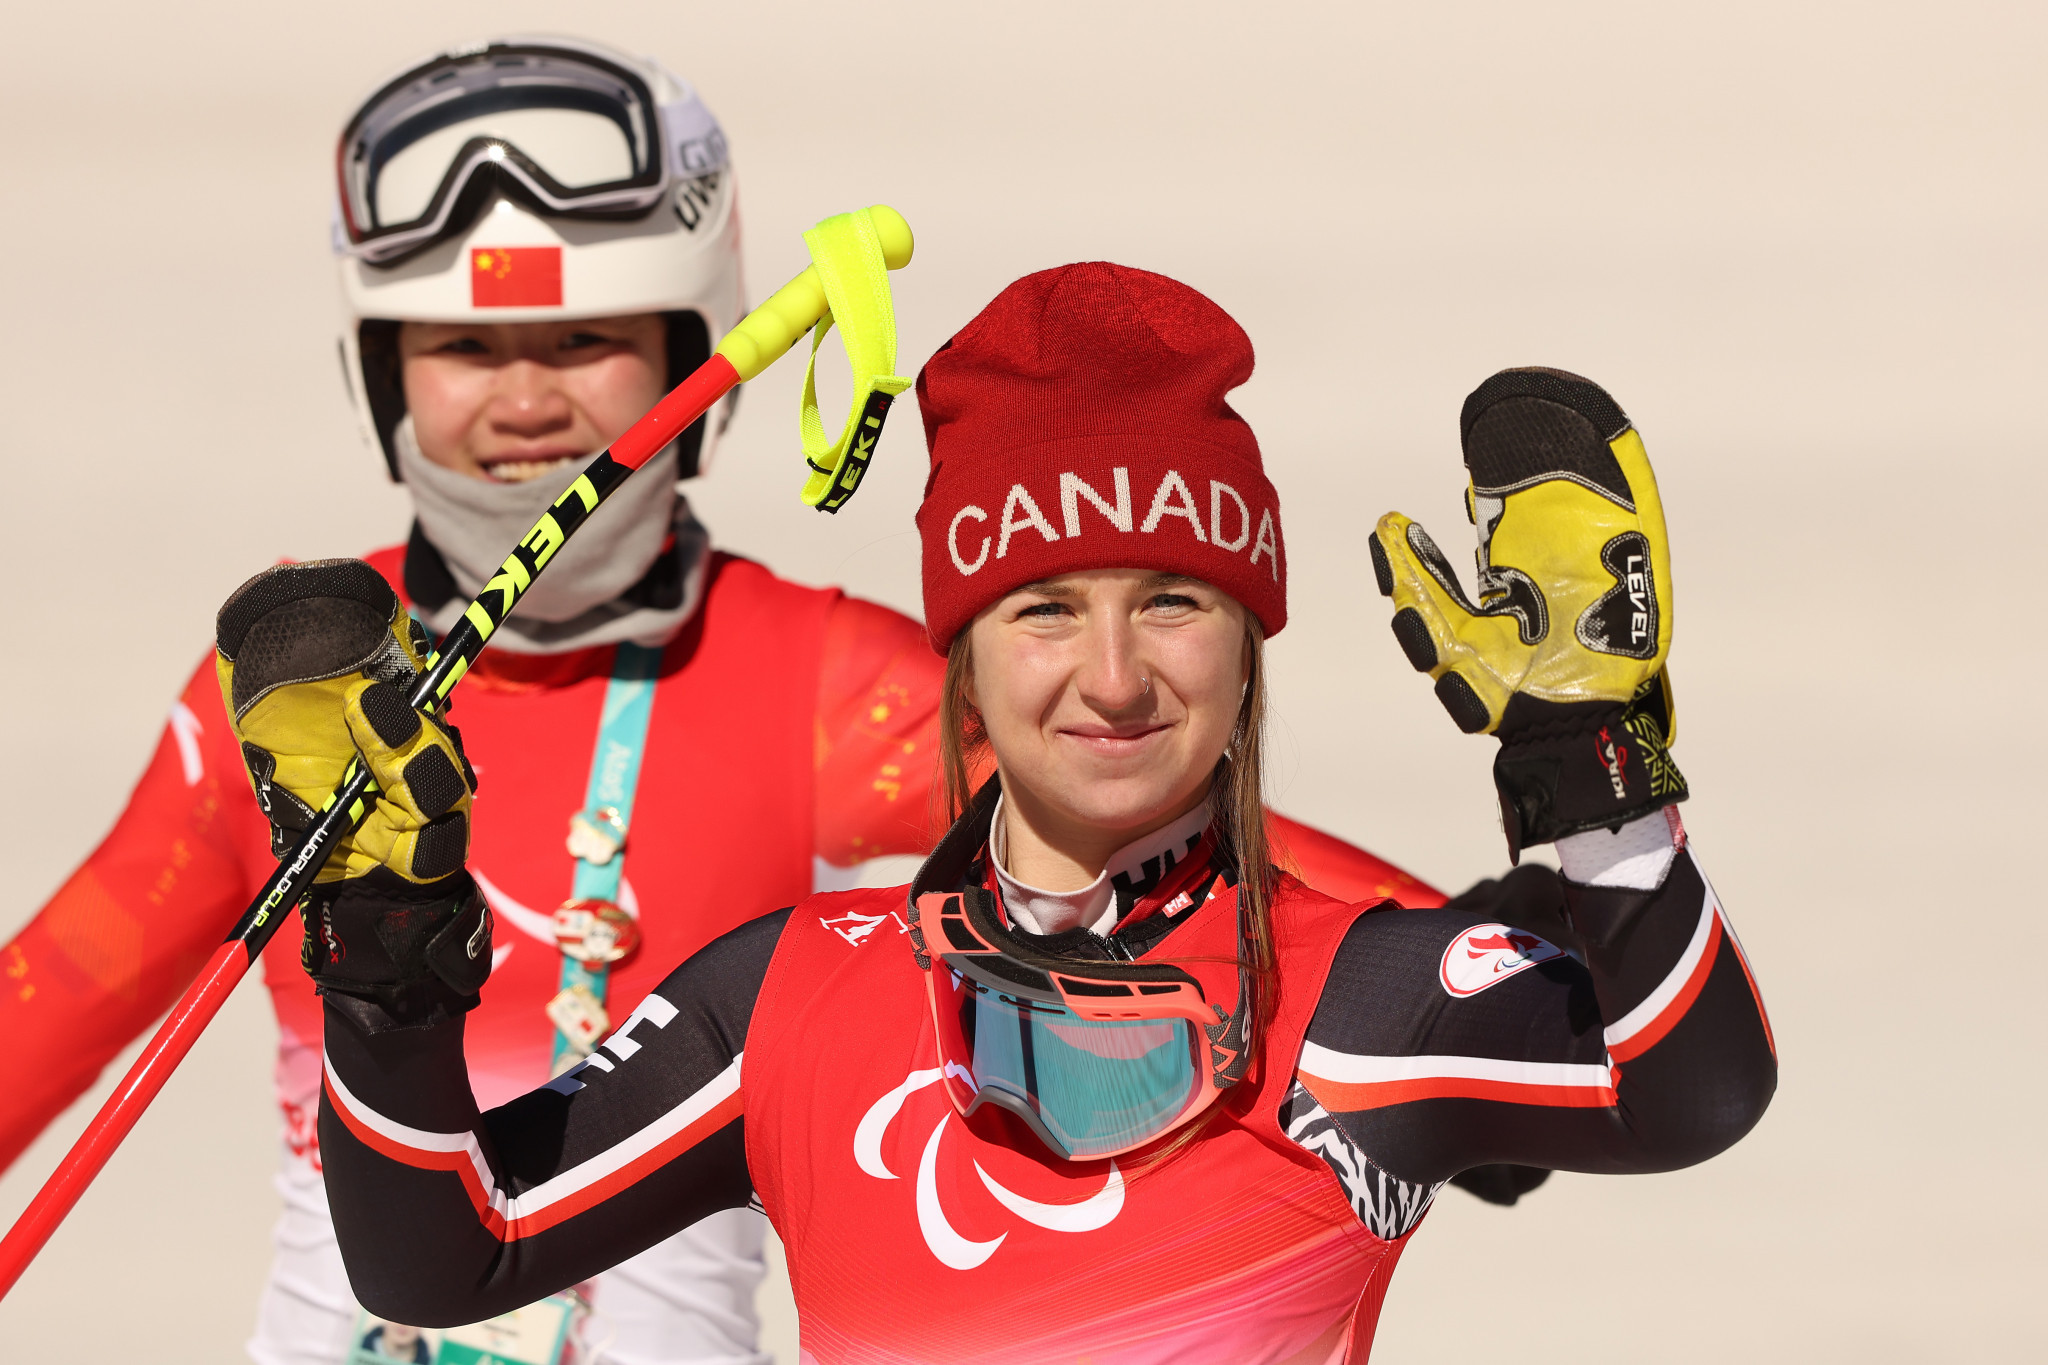 Canada's Mollie Jepsen triumphed in the women's standing downhill, with the competition thrown wide open after back-to-back champion Marie Bochet of France had her ski dislodged ©Getty Images